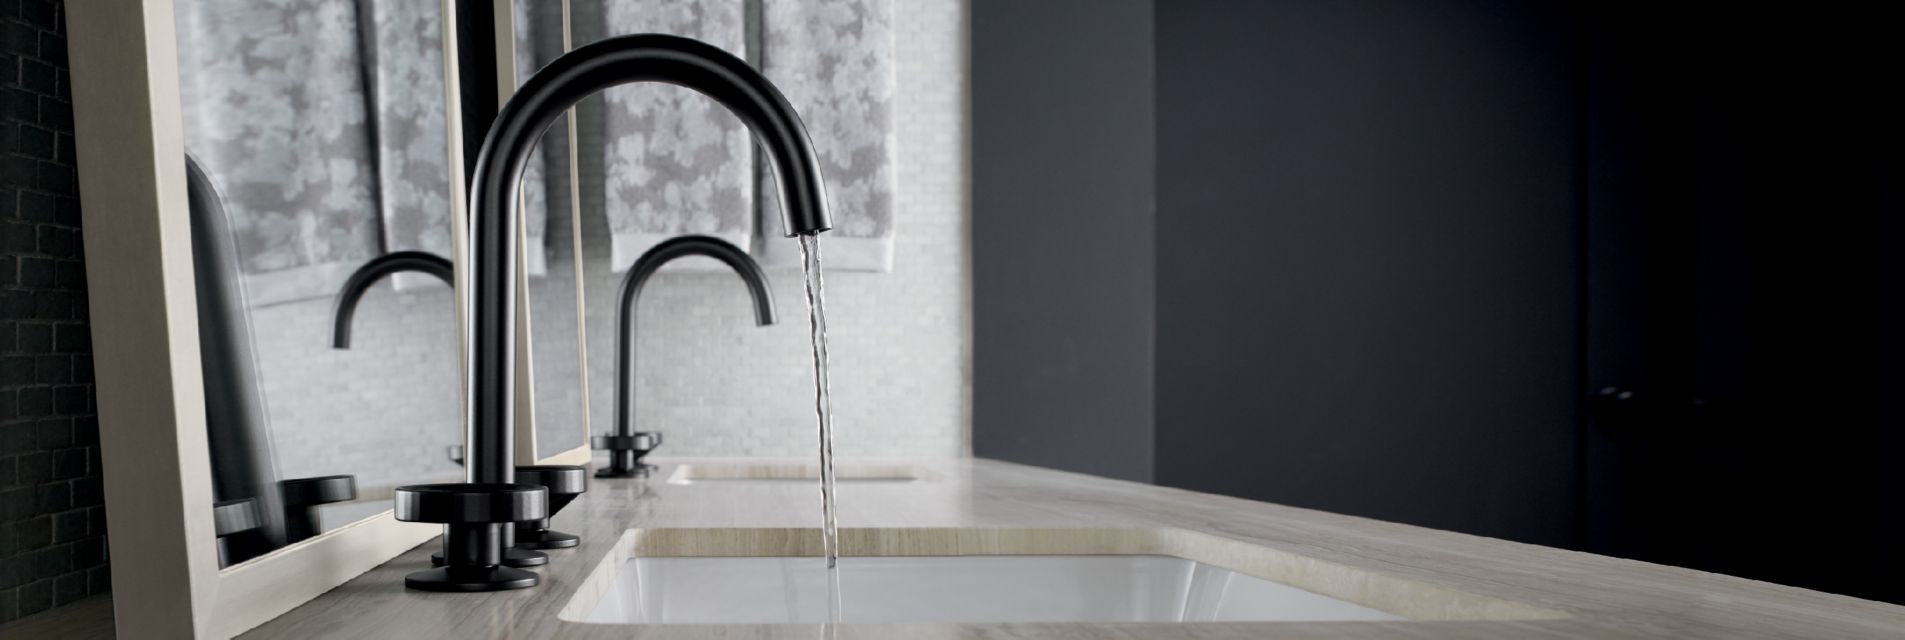 Bathroom Faucets Buying Guide